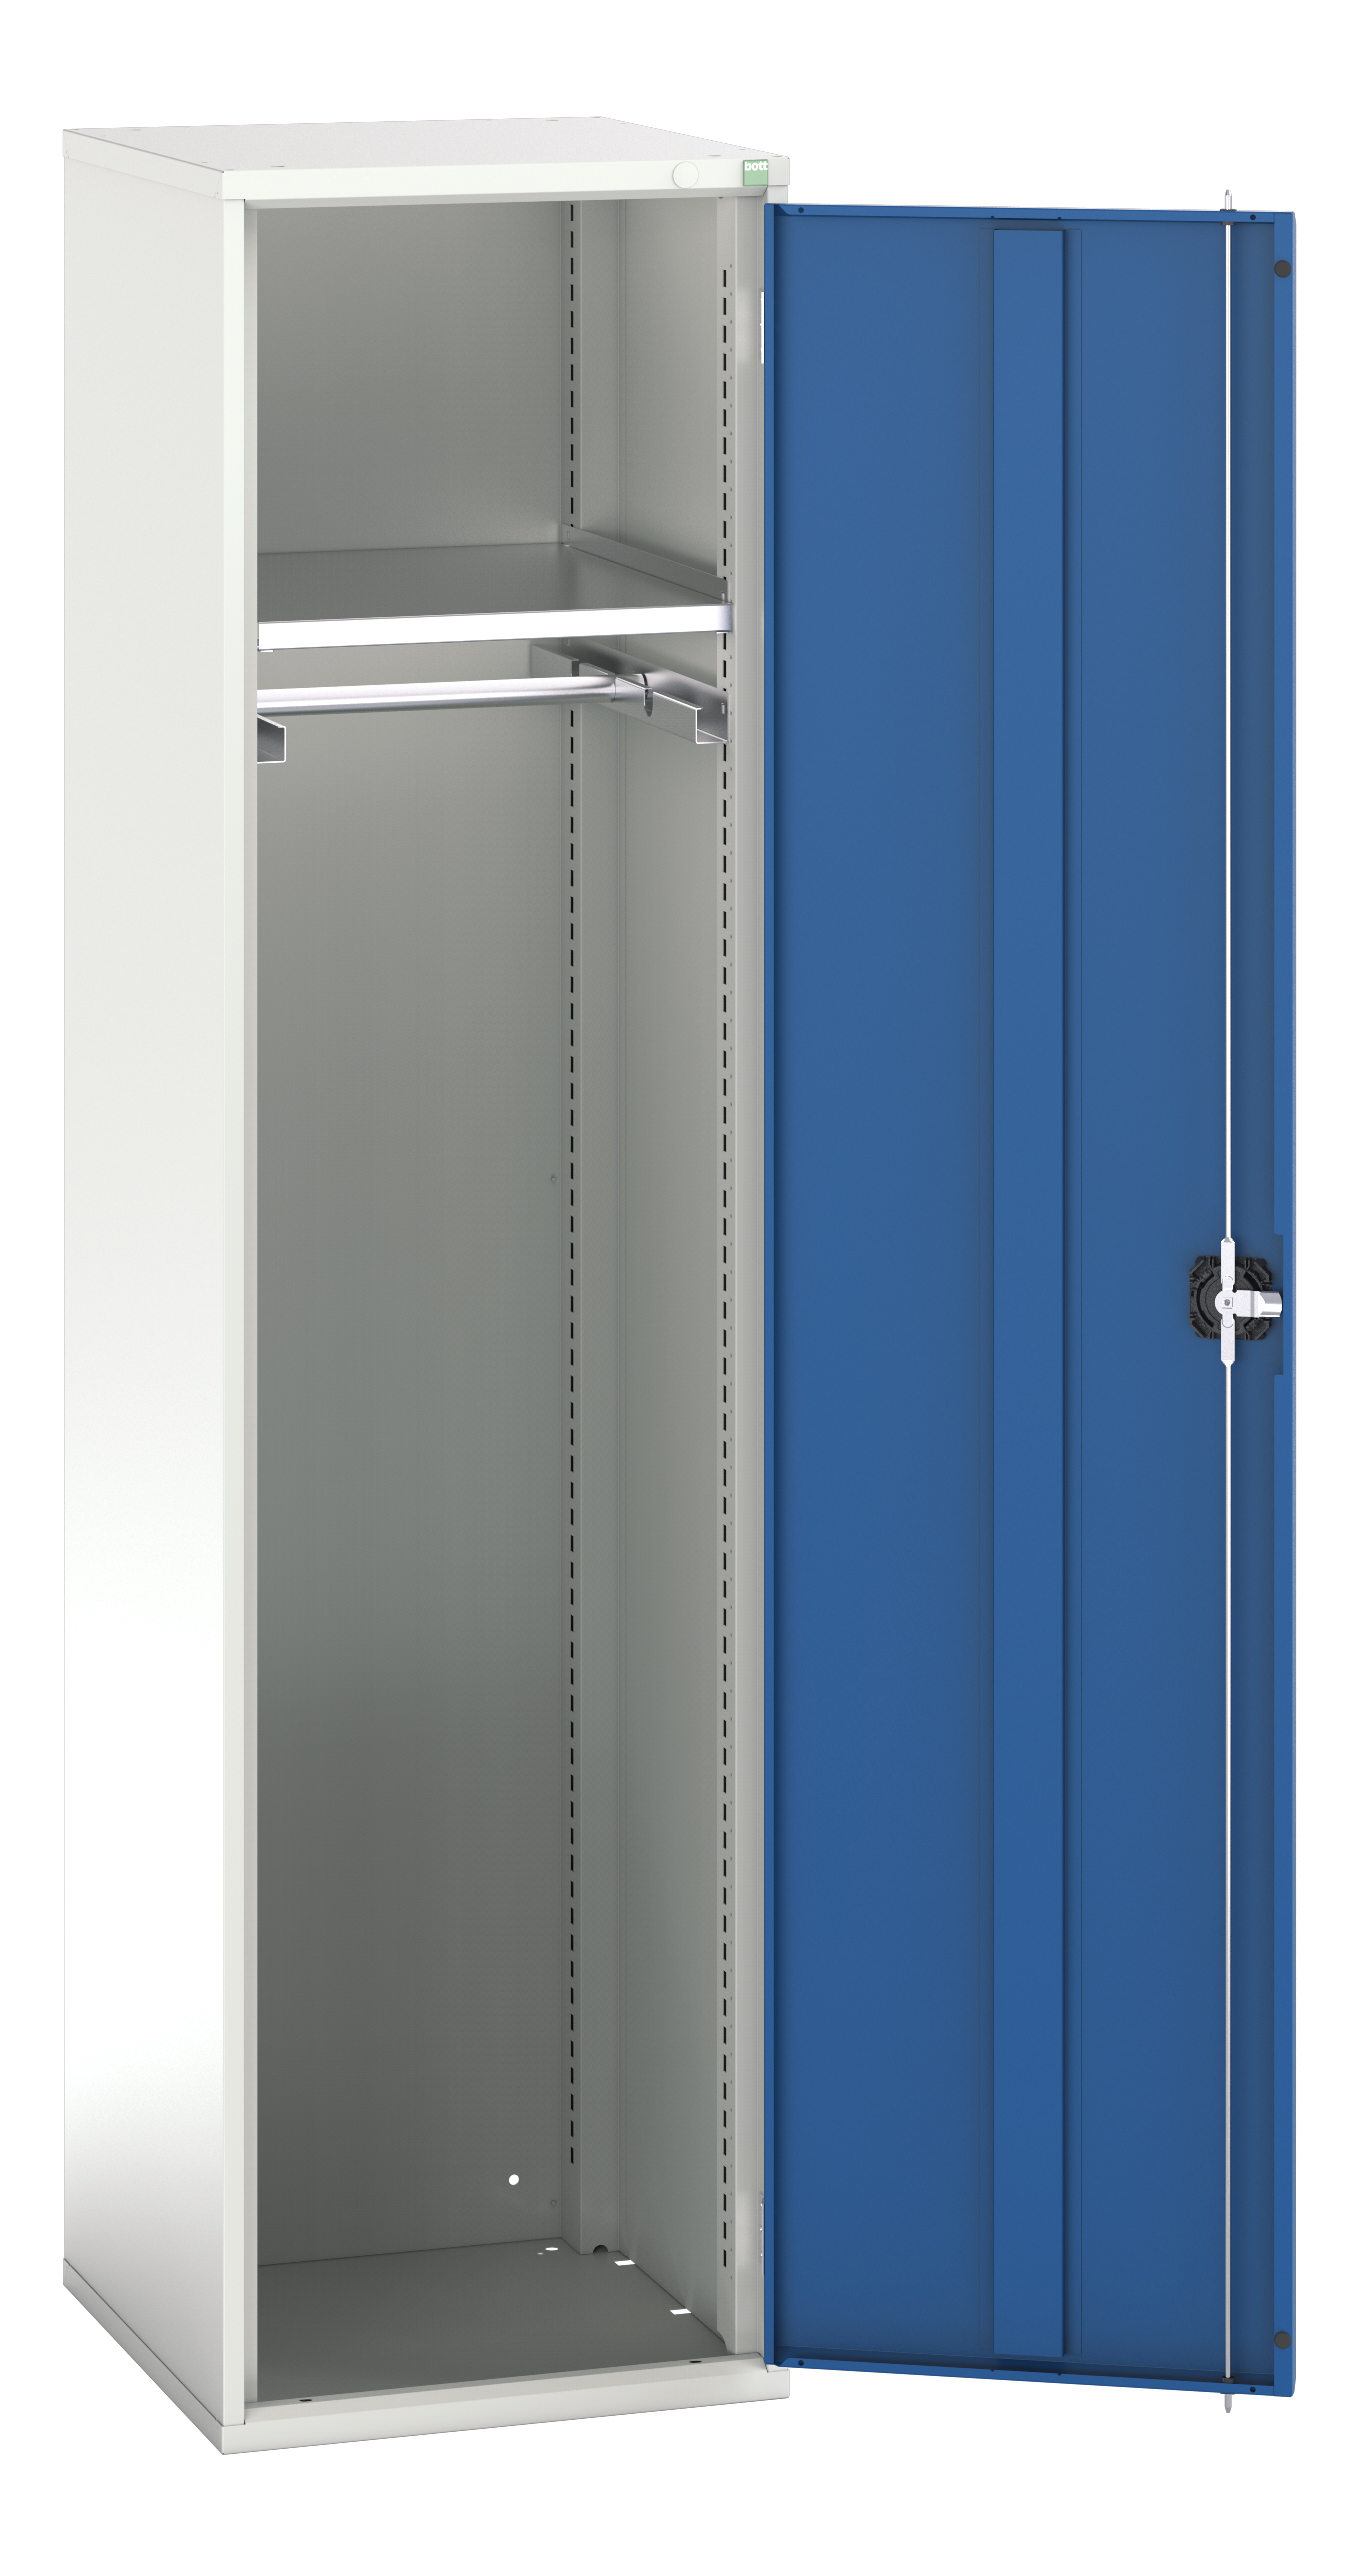 Bott Verso Ppe / Janitorial Kitted Cupboard - 16926350.11